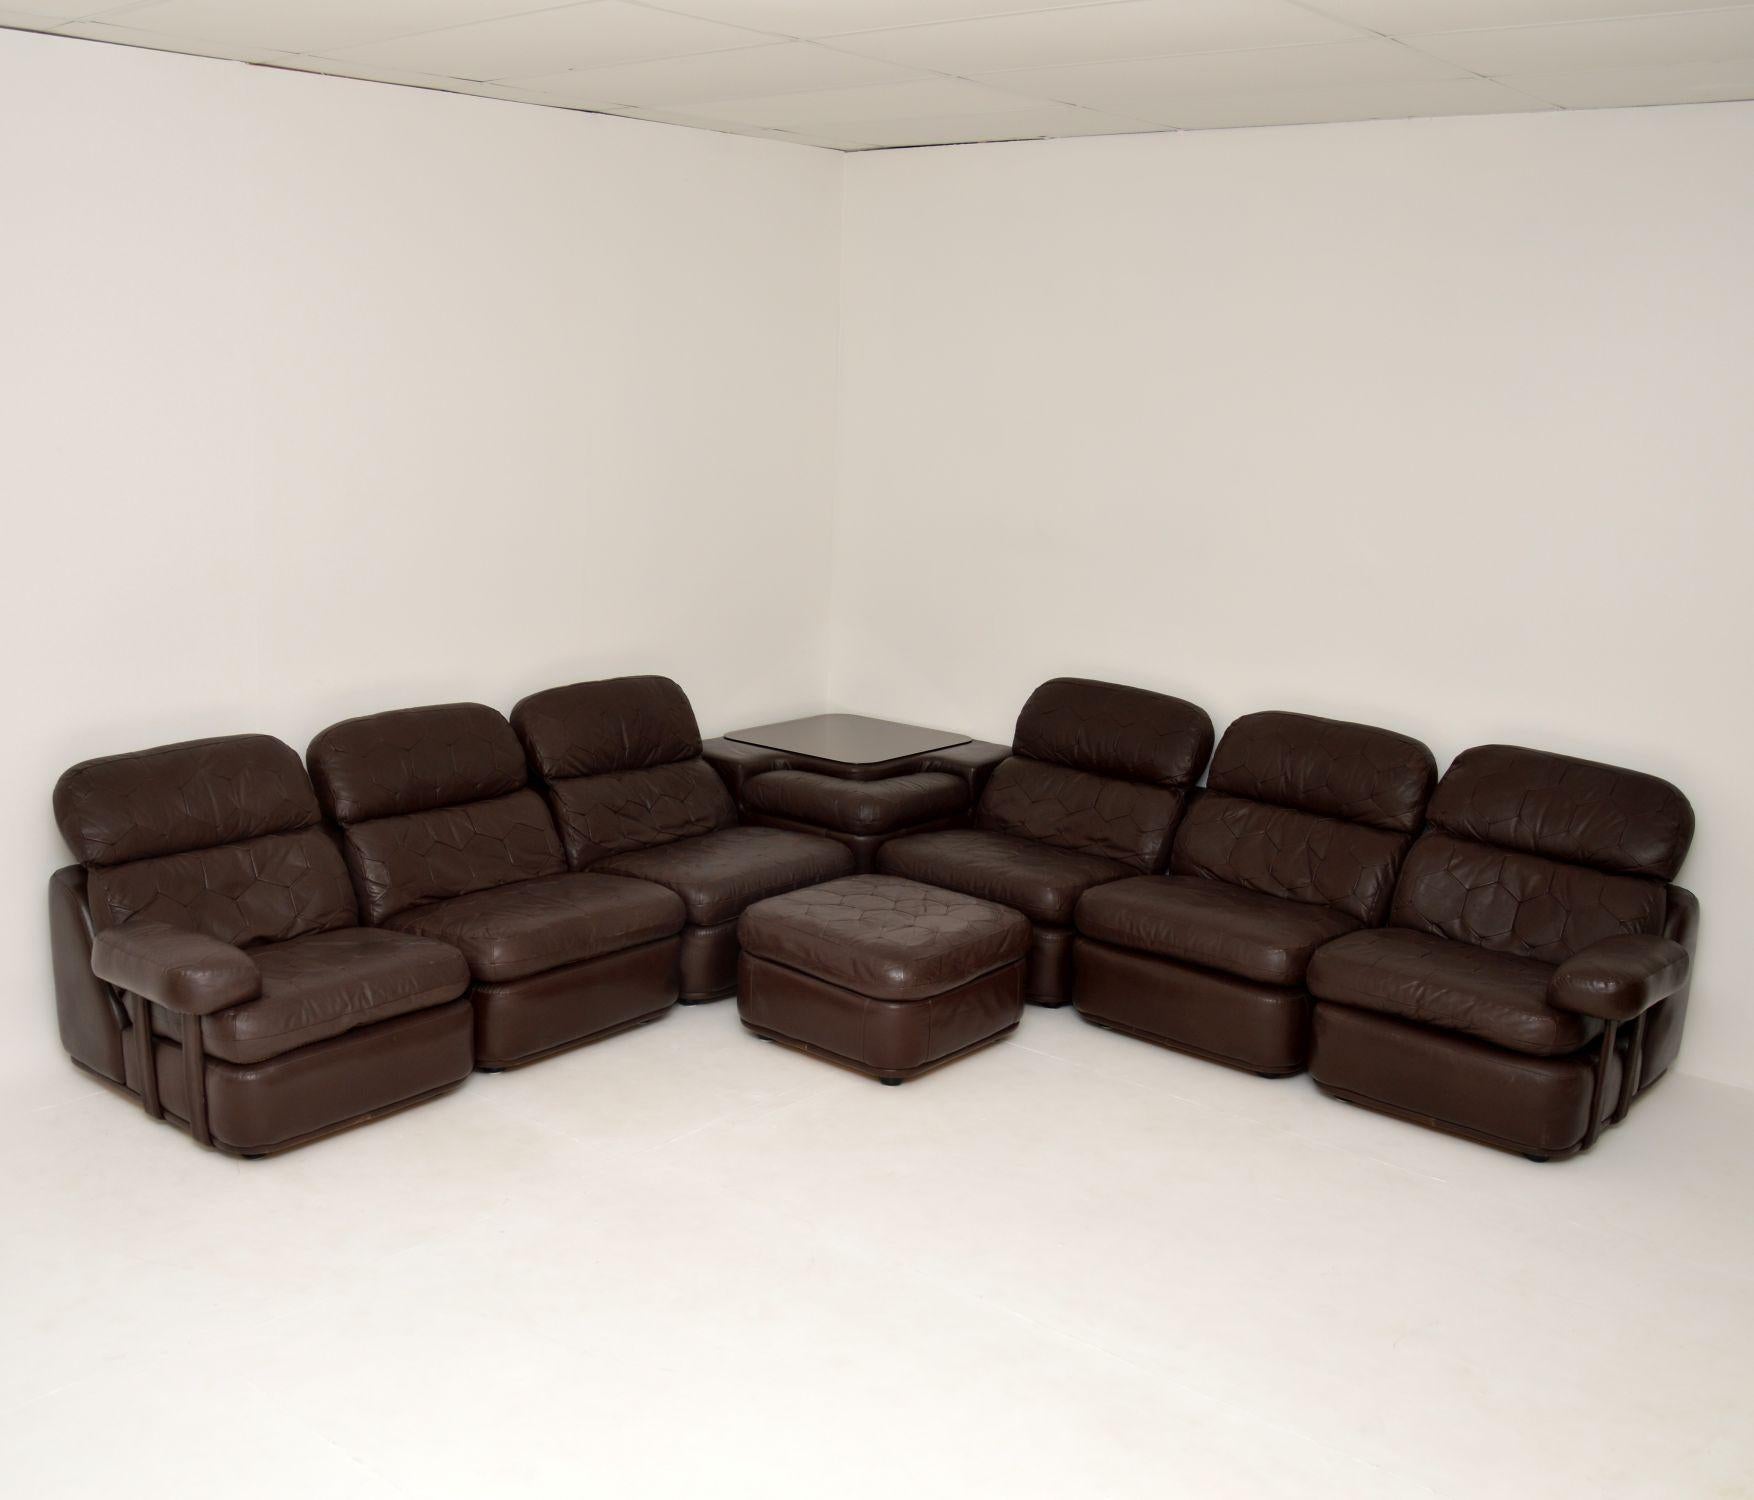 A beautiful, impressive and extremely comfortable vintage leather modular corner sofa suite. This was made in England, it dates from around the 1970’s.

This is of amazing quality and is very versatile. There are eight pieces including six chairs